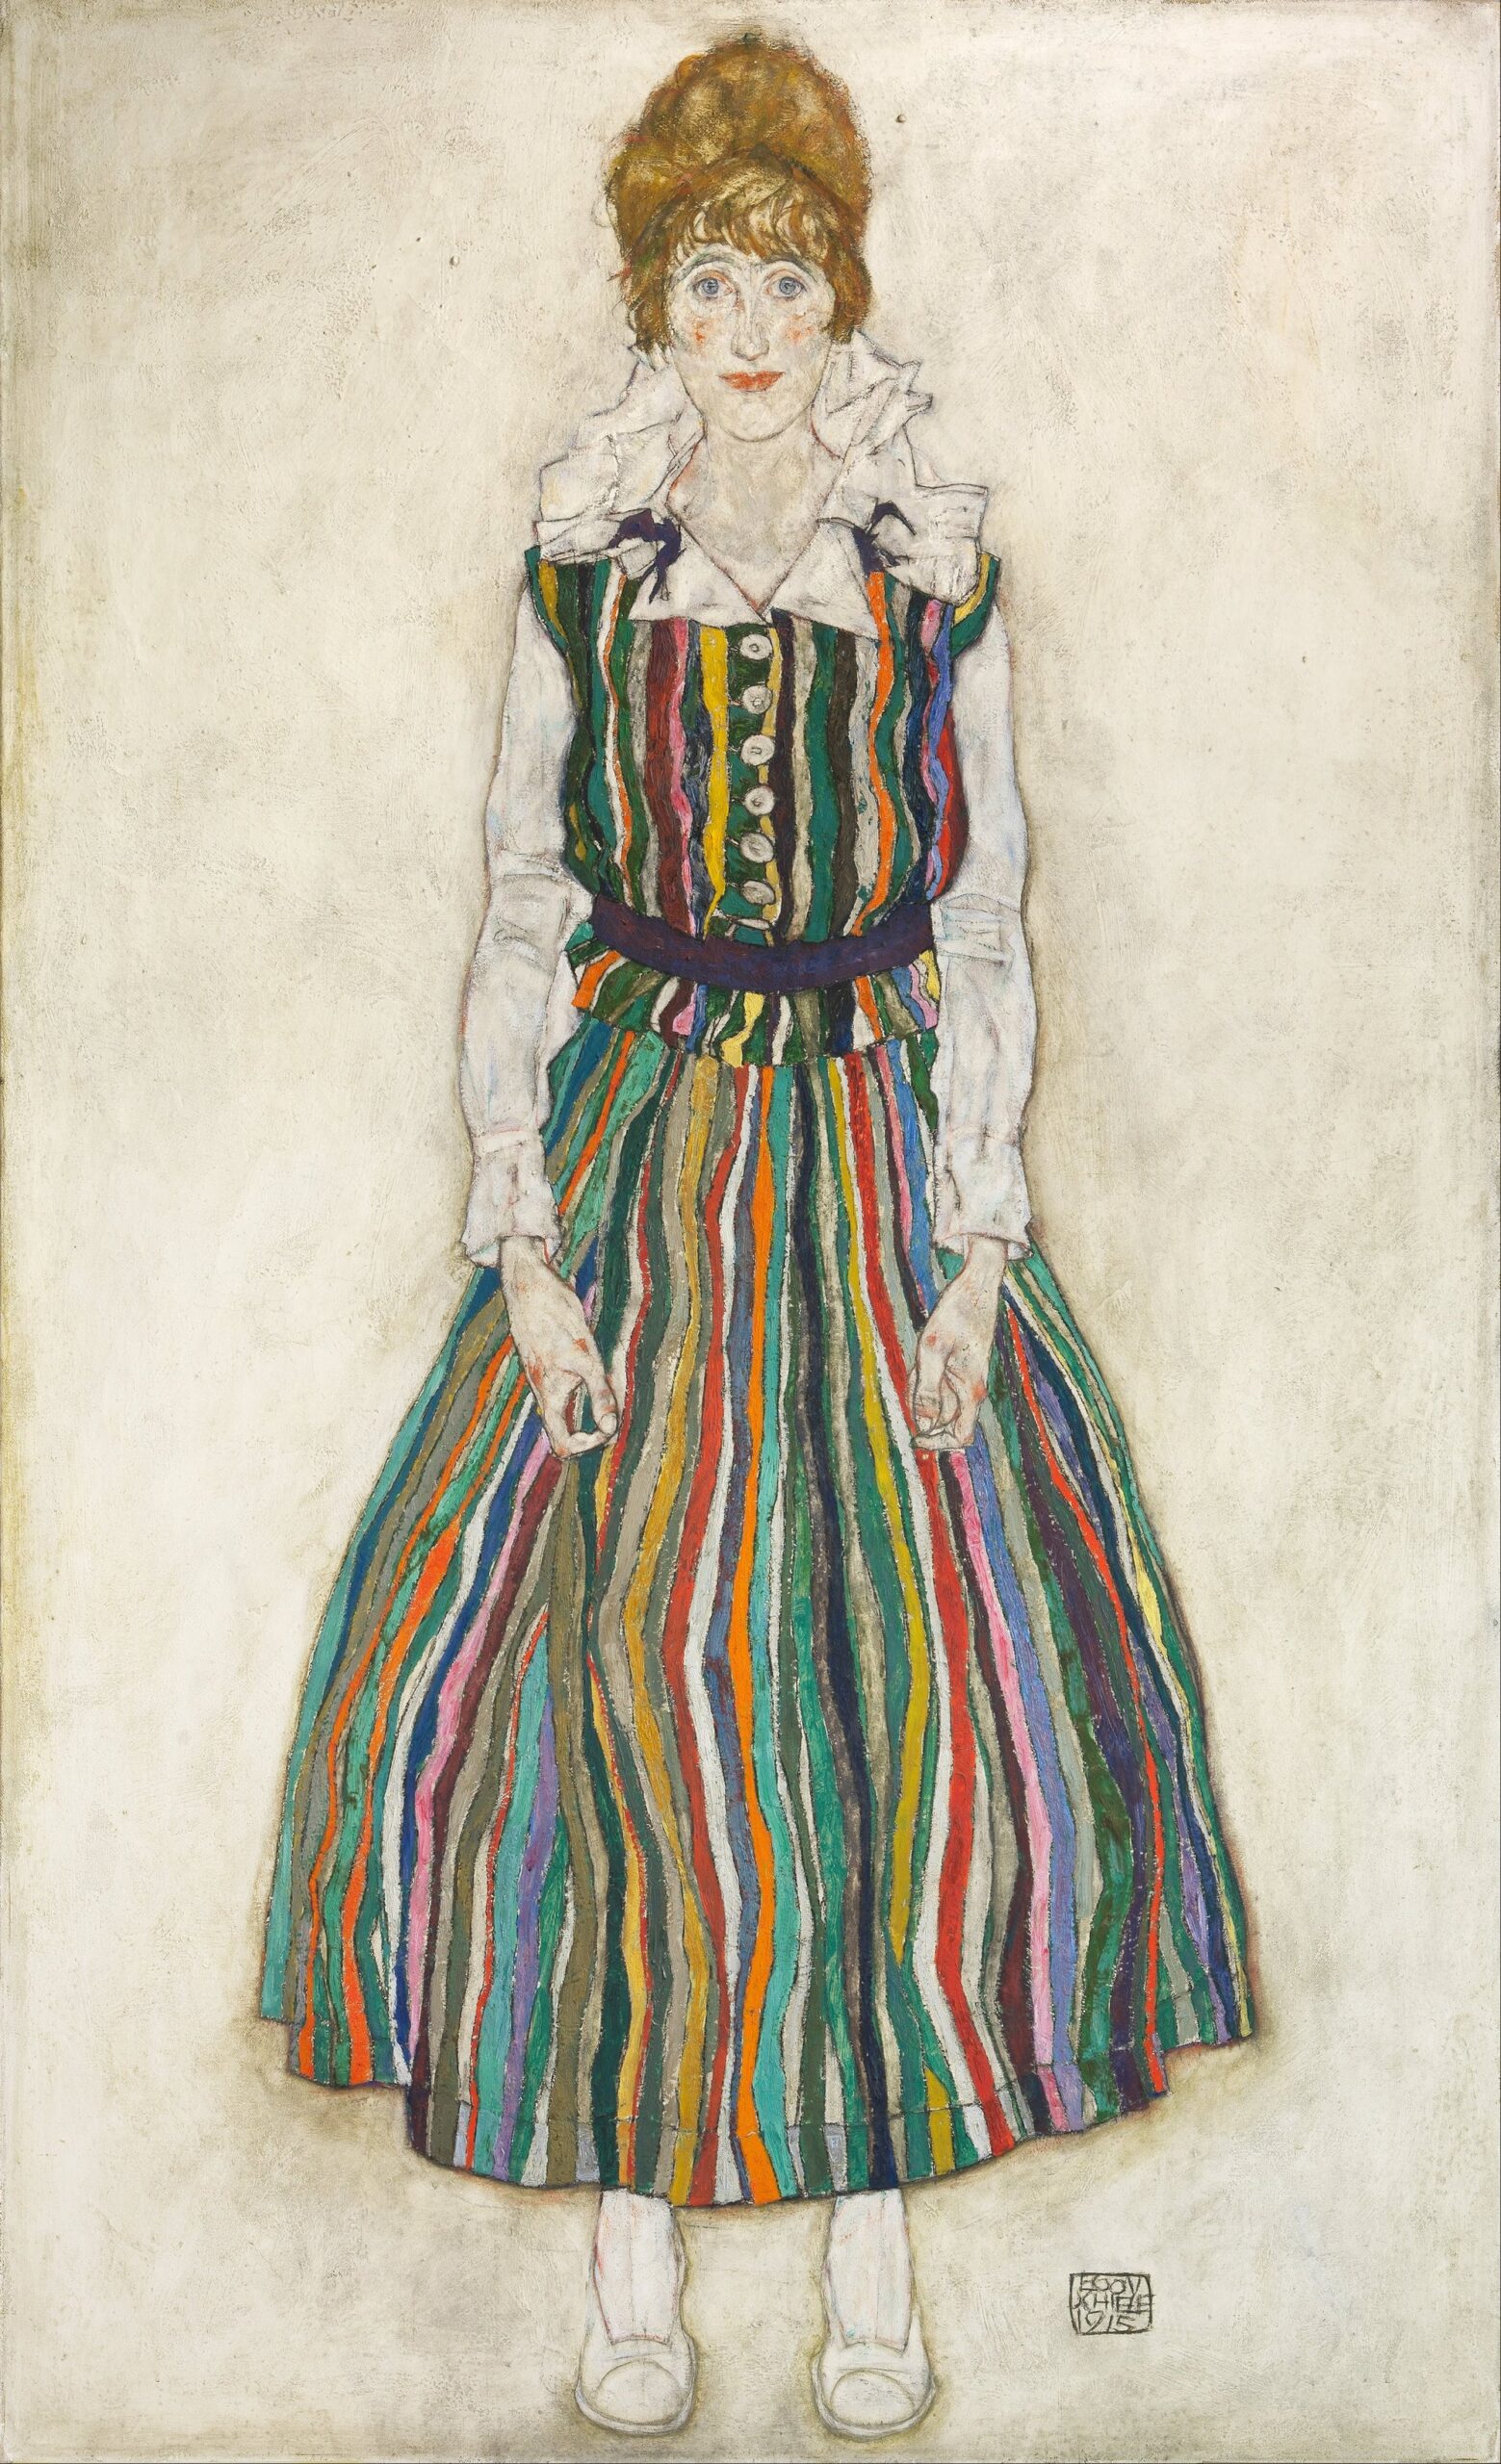 Portrait of Edith (The Artist's Wife), 1915